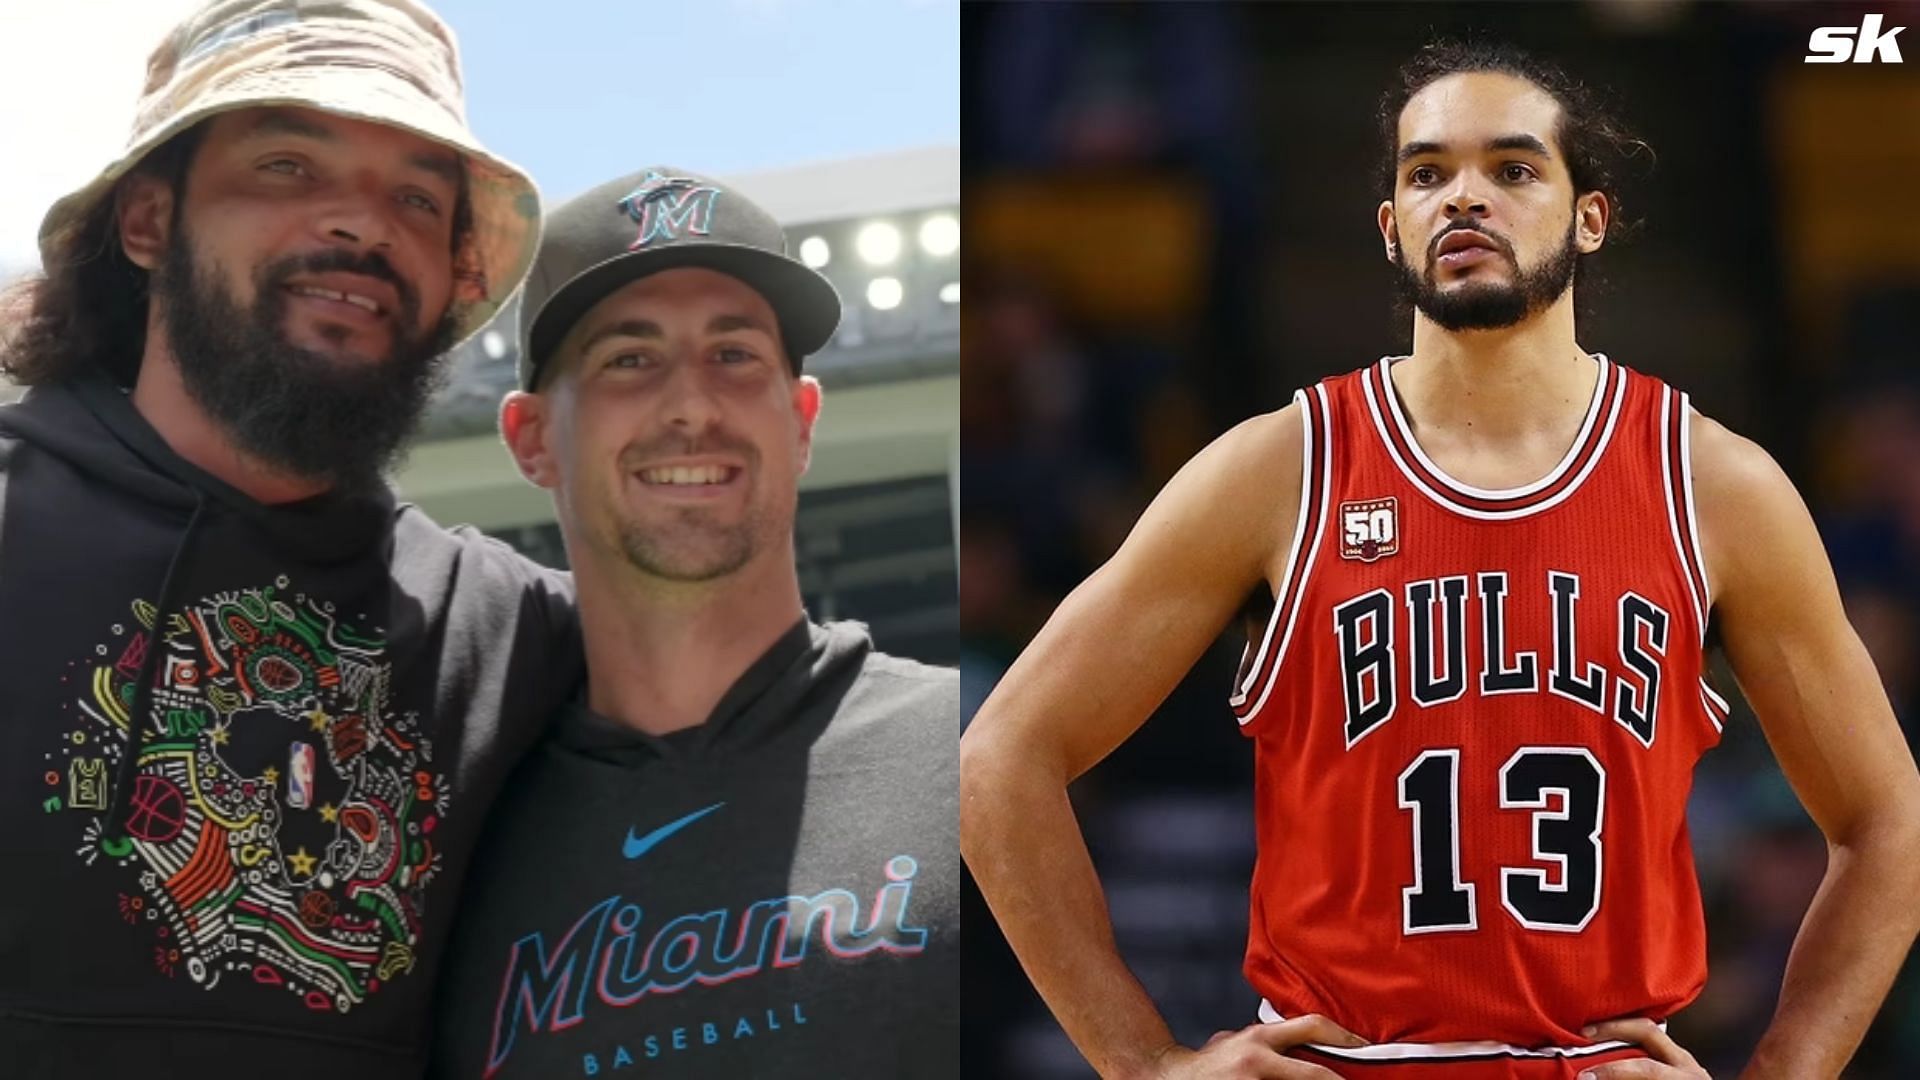 Joakim Noah throws ceremonial first pitch at LoanDepot Park on Sunday